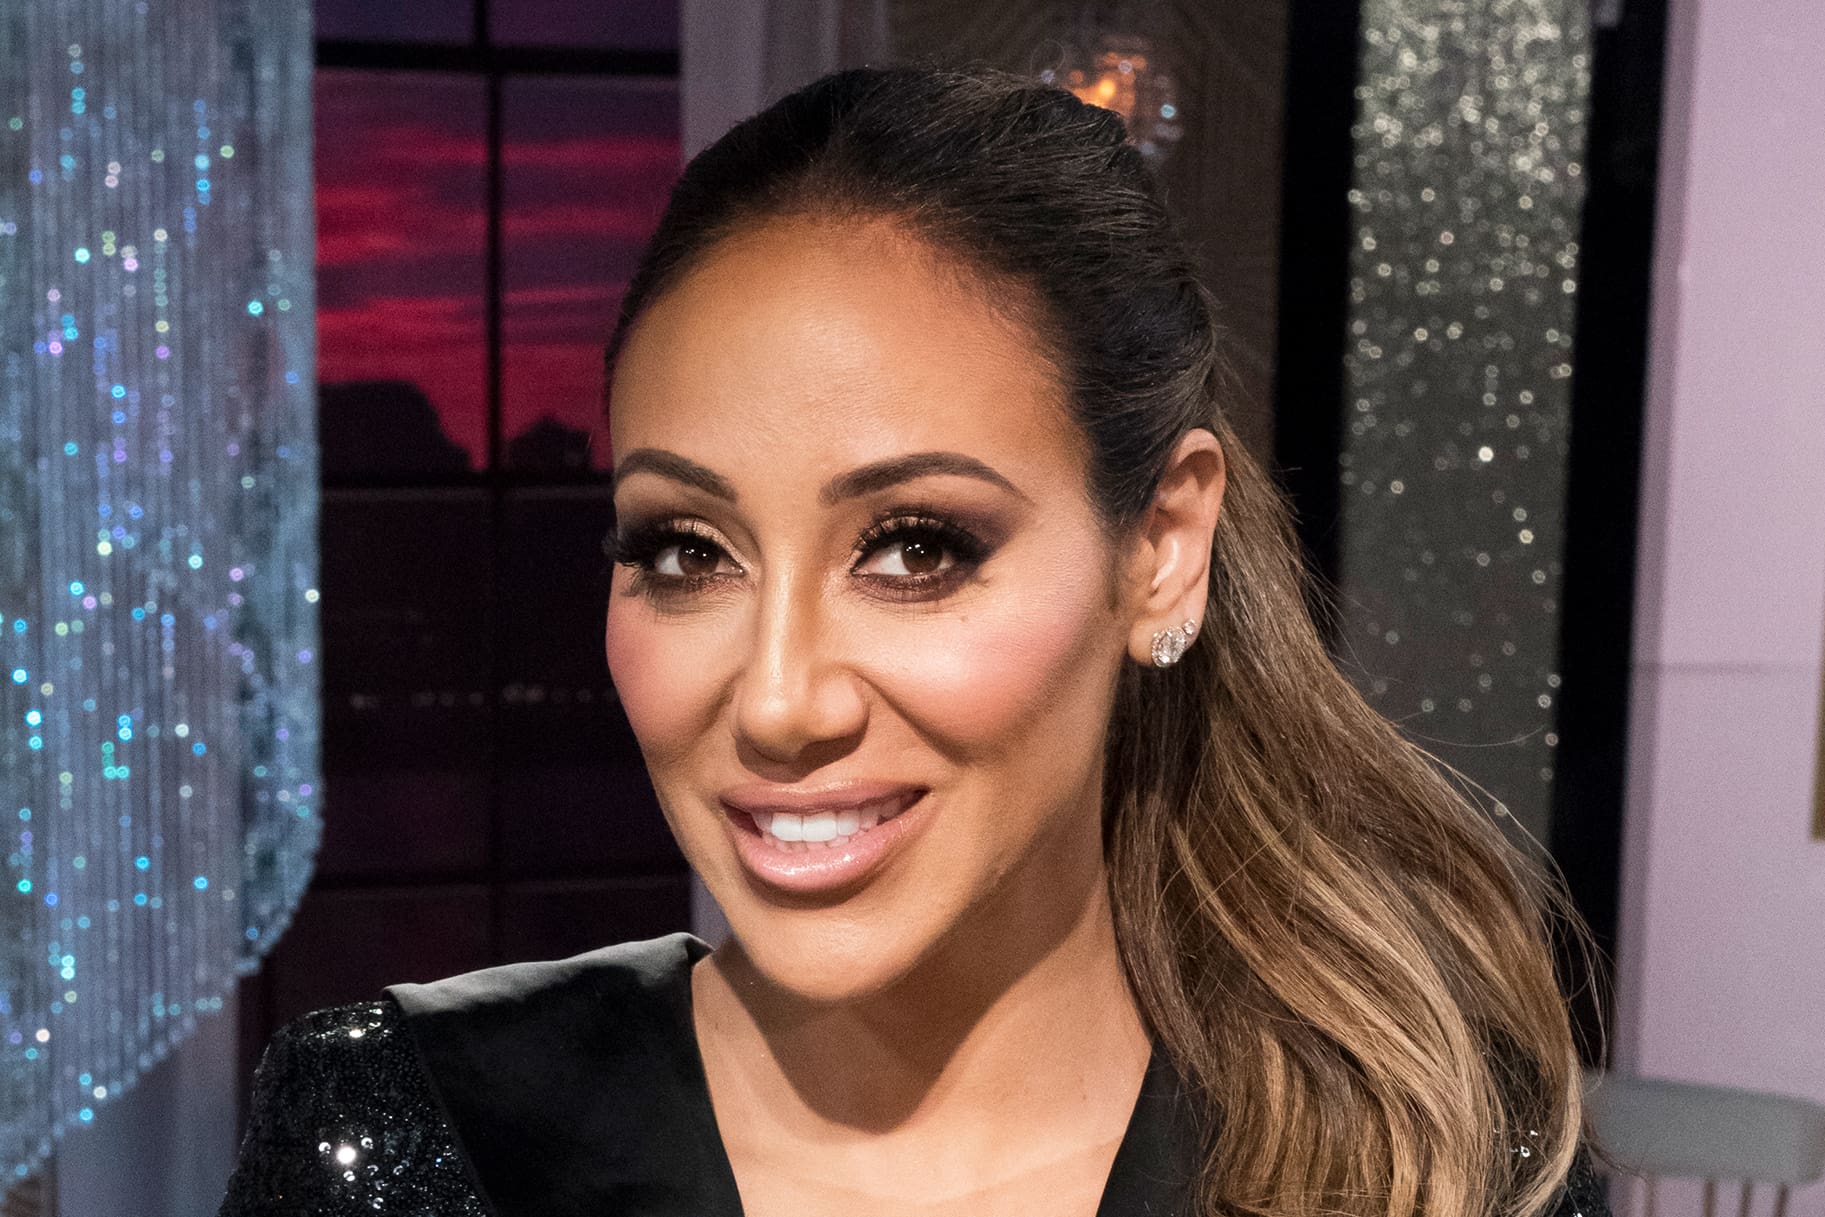 Melissa Gorga Says She’s Freezing Her Eggs – Reveals Plans To Add A Fourth Baby To ...5 日前